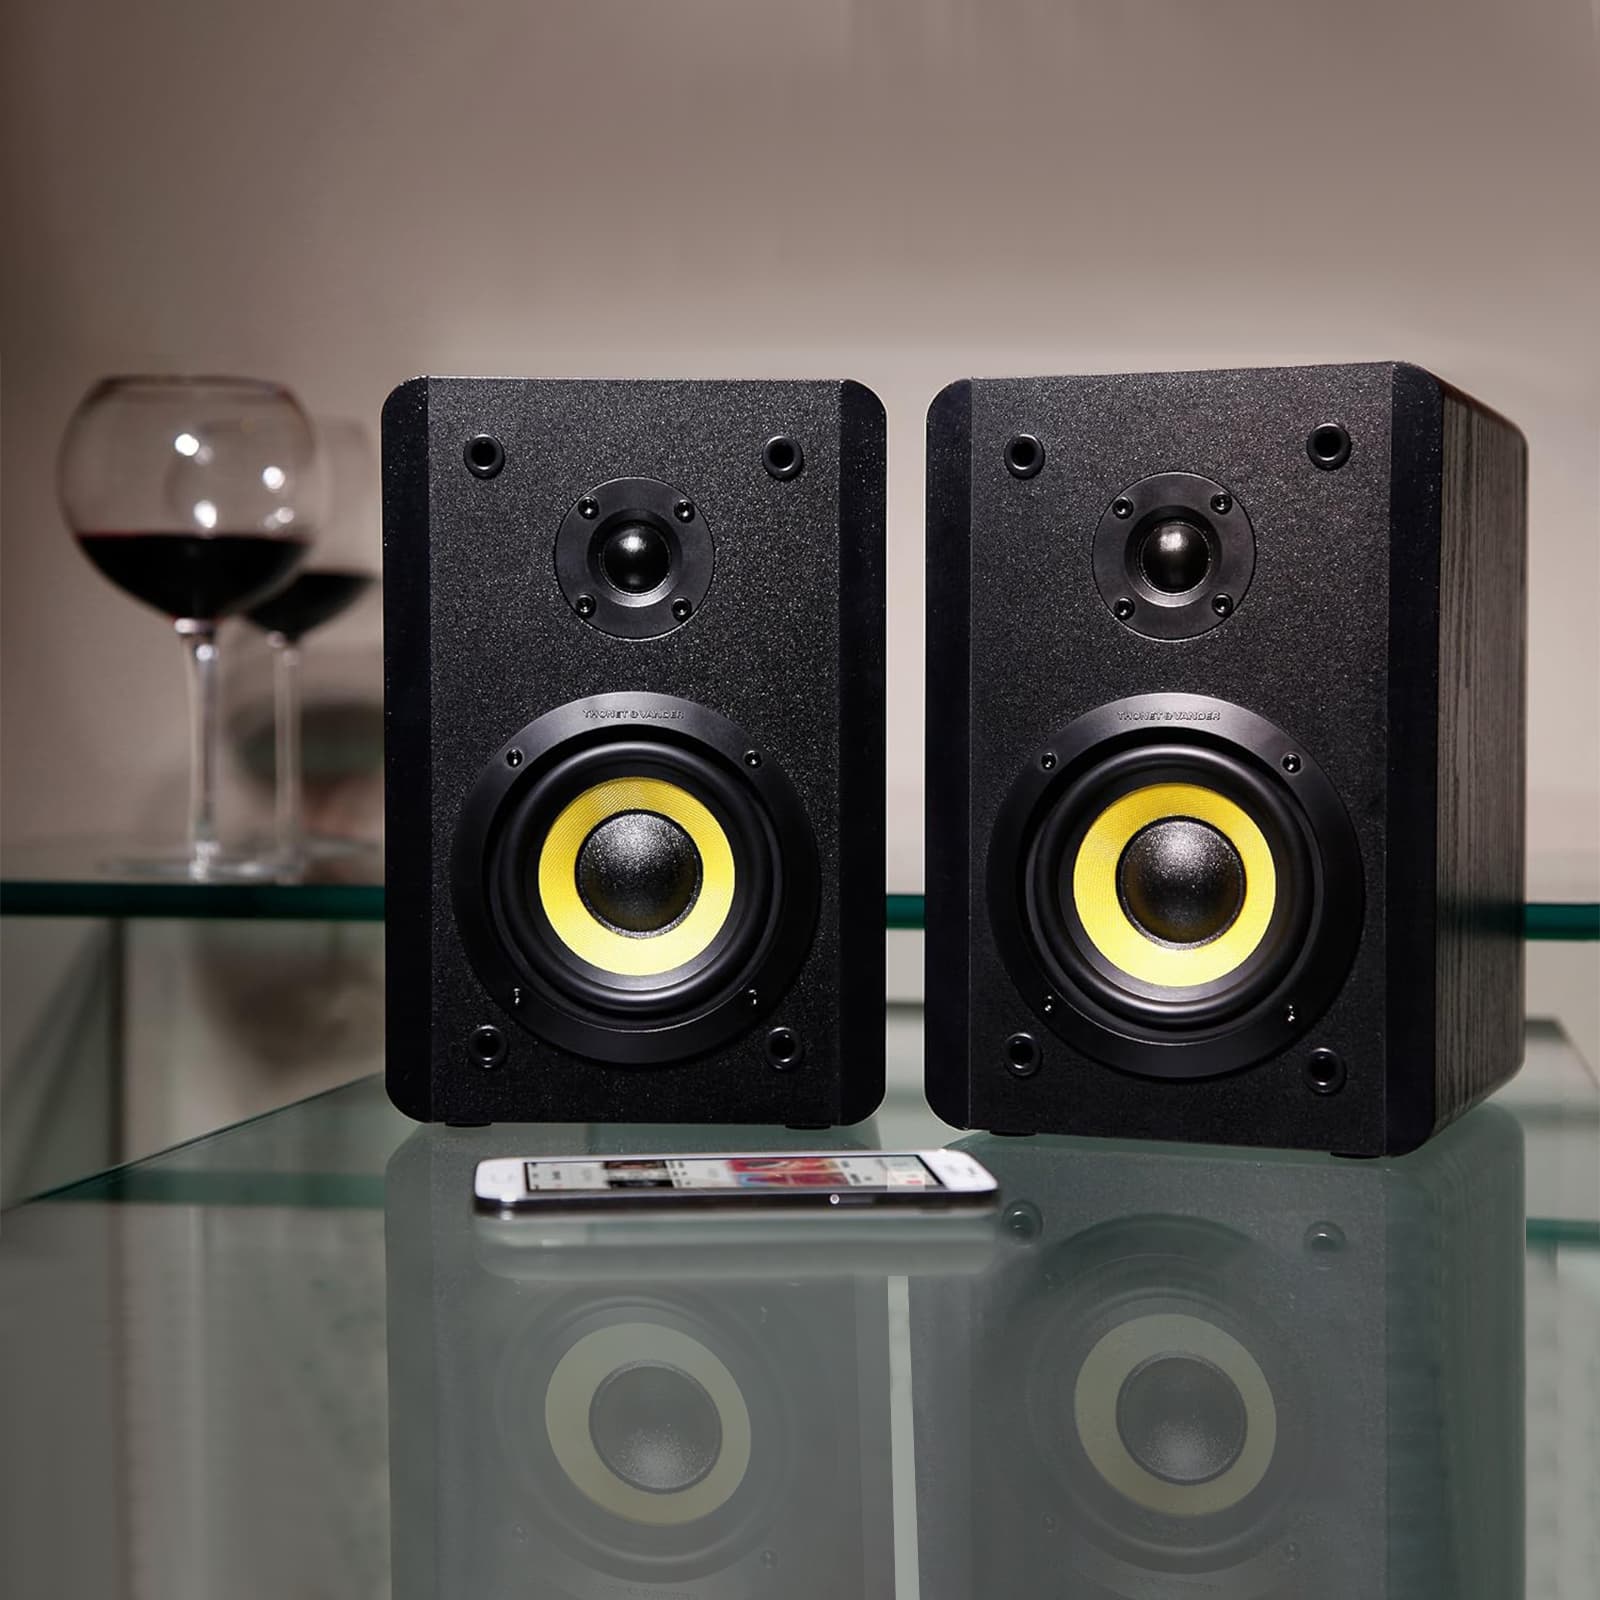 Thonet and Vander Bluetooth 4.0 Bookshelf Speakers Integrated Amplifier with Bass and Treble